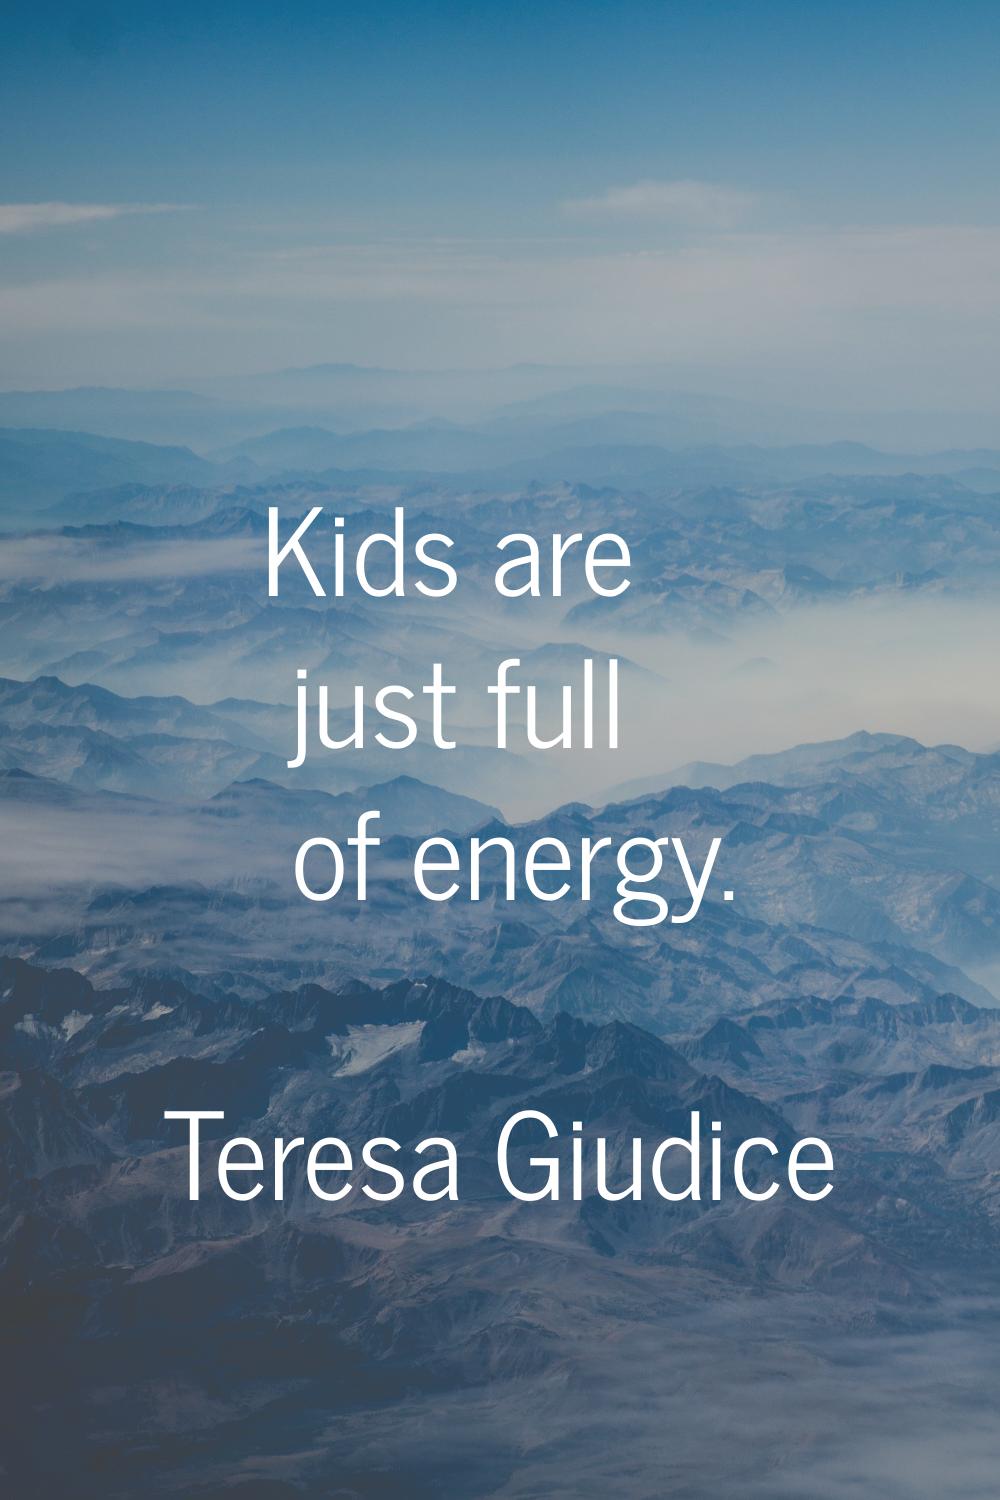 Kids are just full of energy.